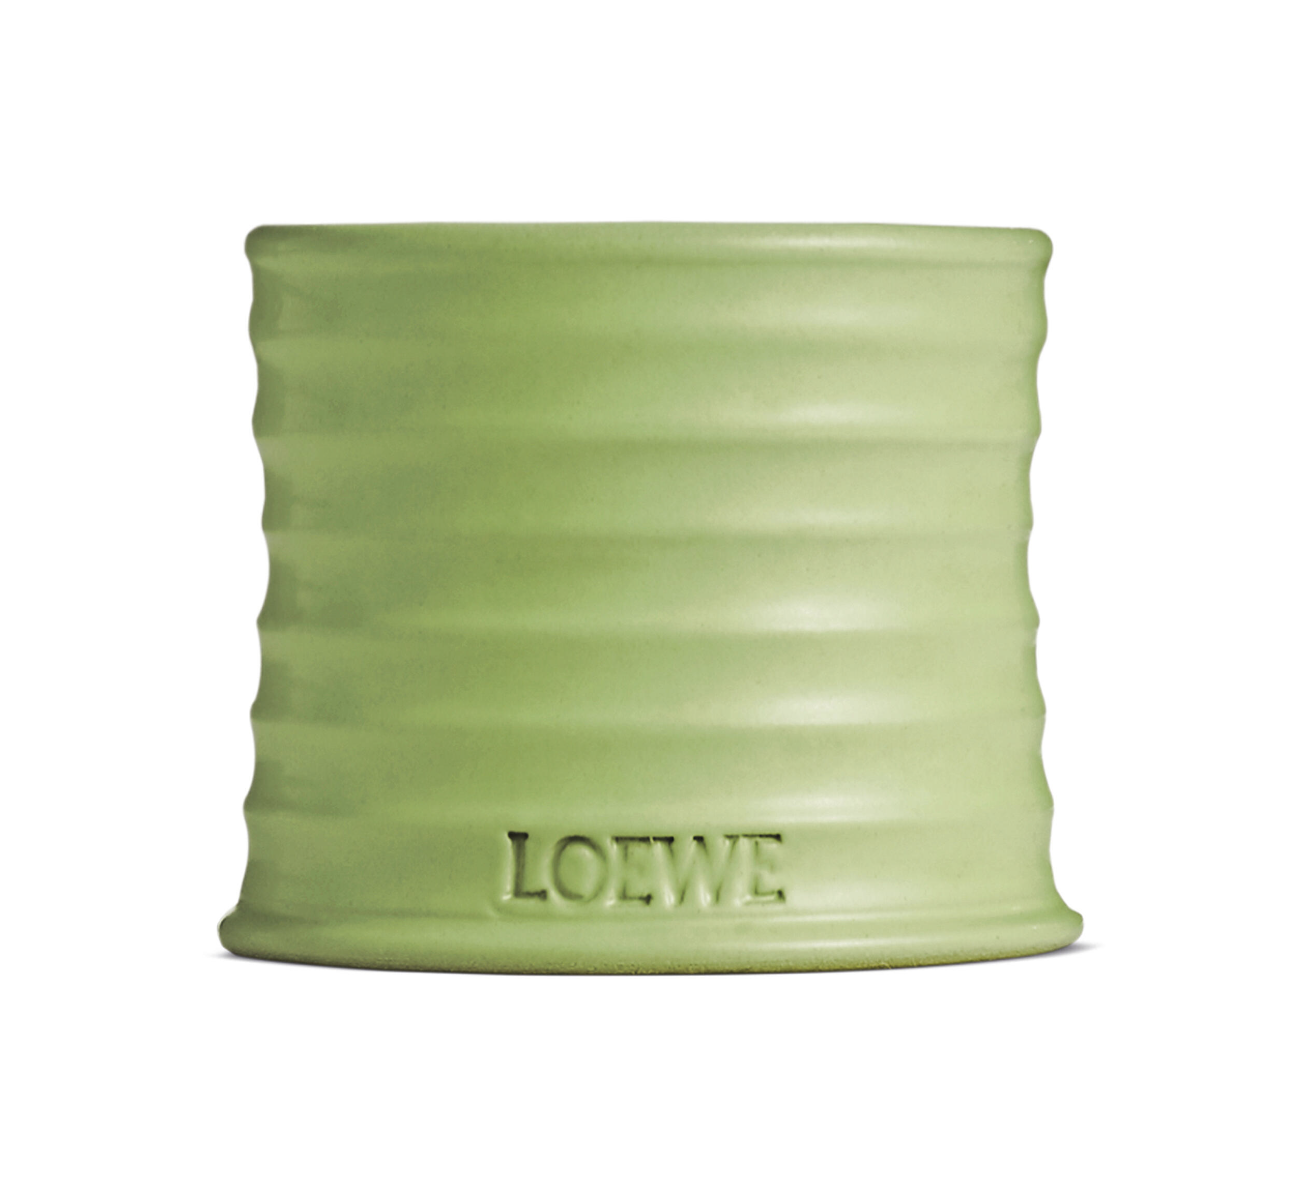 whats-new-in-beauty-loewe-cucumber-candle